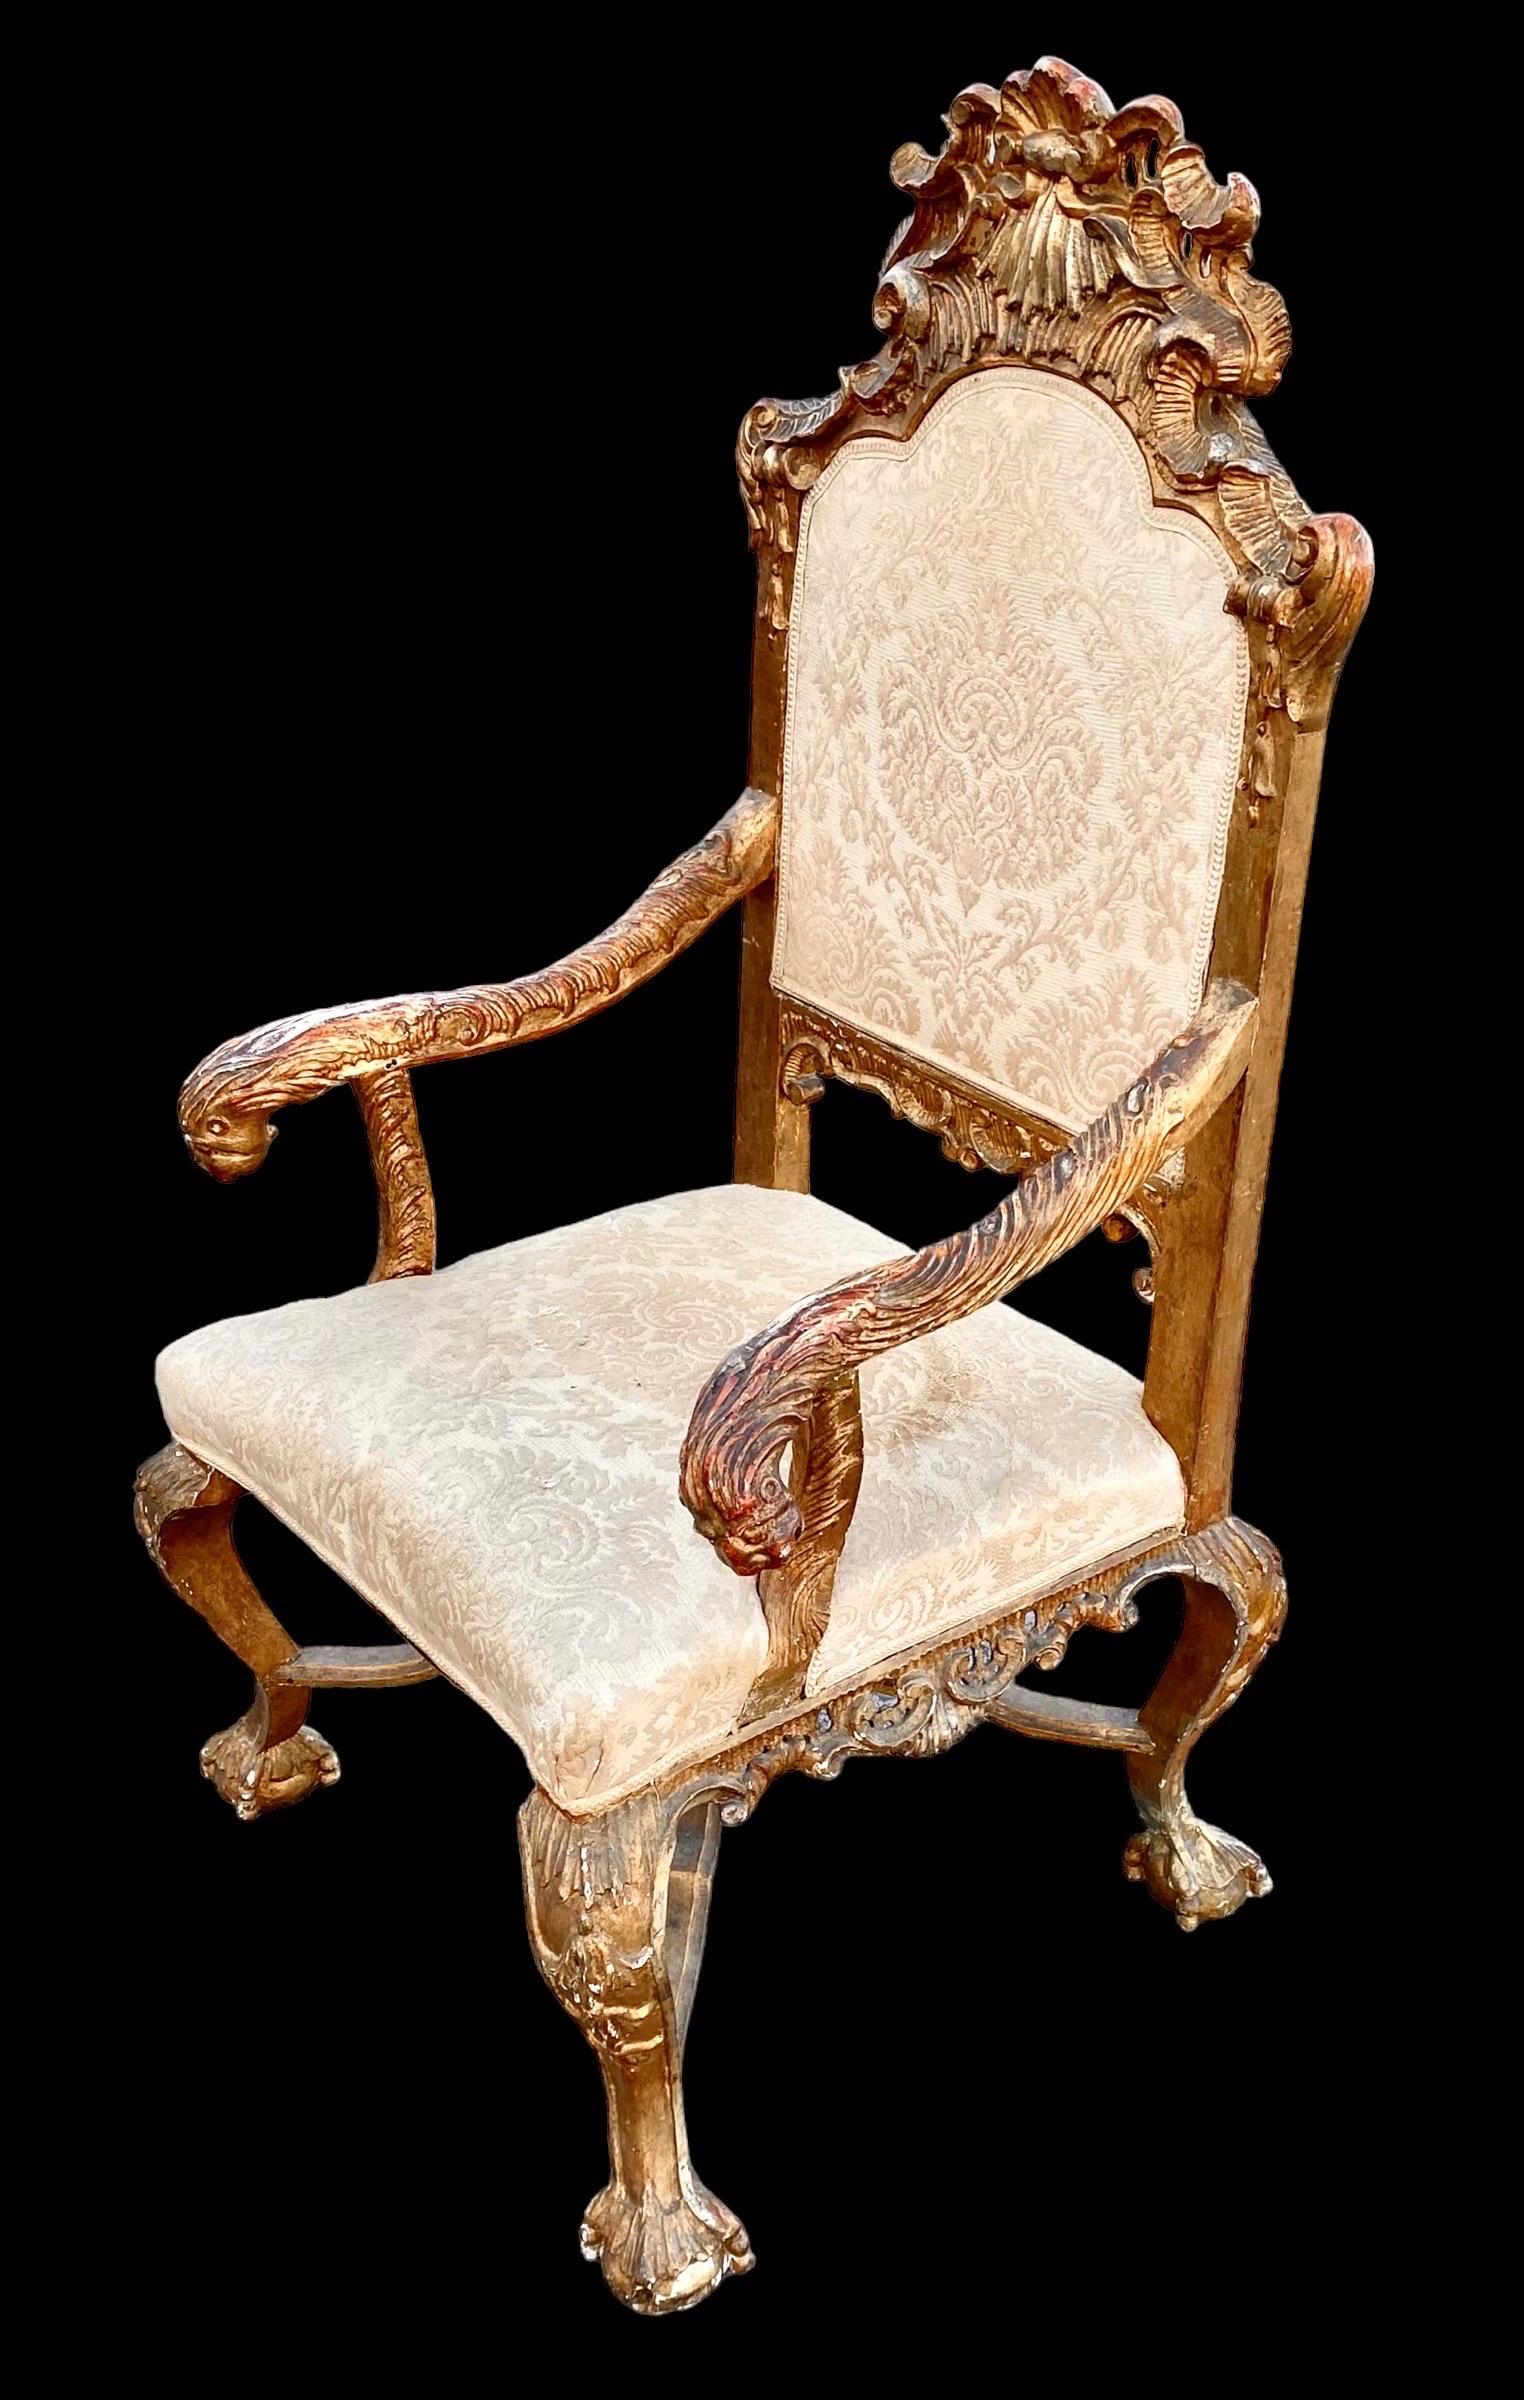 Antique Italian Rococo high back hand carved gilded wood arm chair with beige damask seat and back. 
This antique 18th century Italian Rococo armchair features c-scrolls, rocaille and foliate designs richly hand carved throughout, the deeply carved